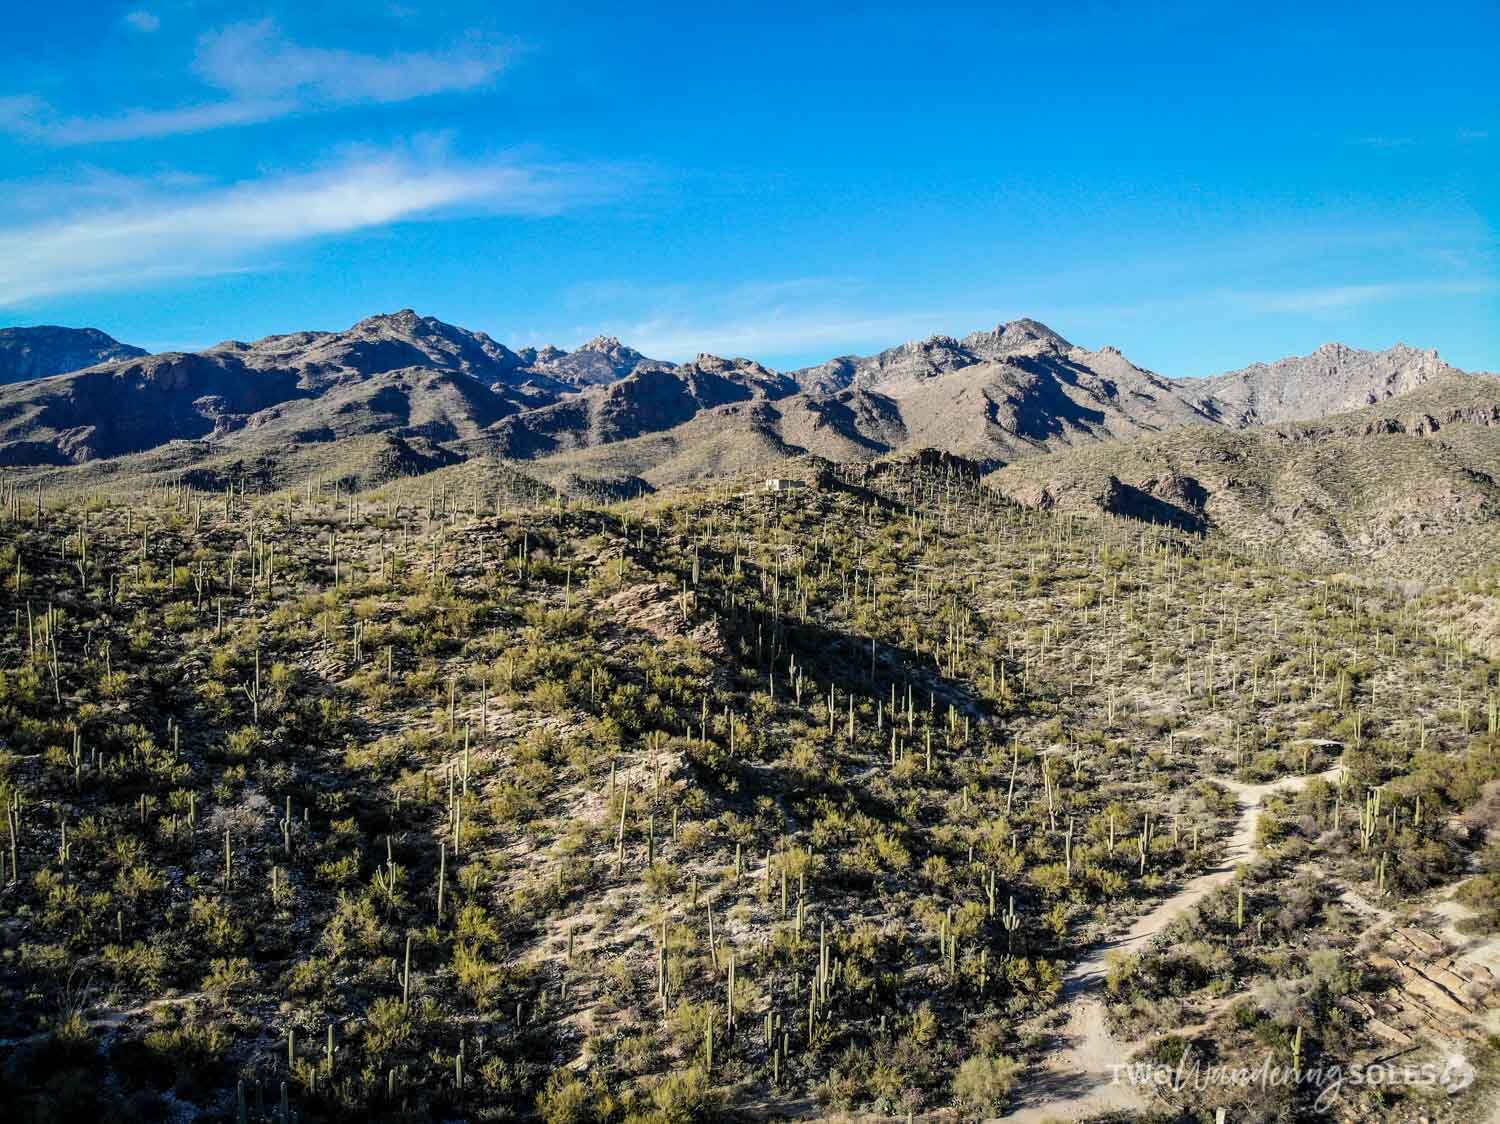 Things to Do in Tucson Sabino Canyon